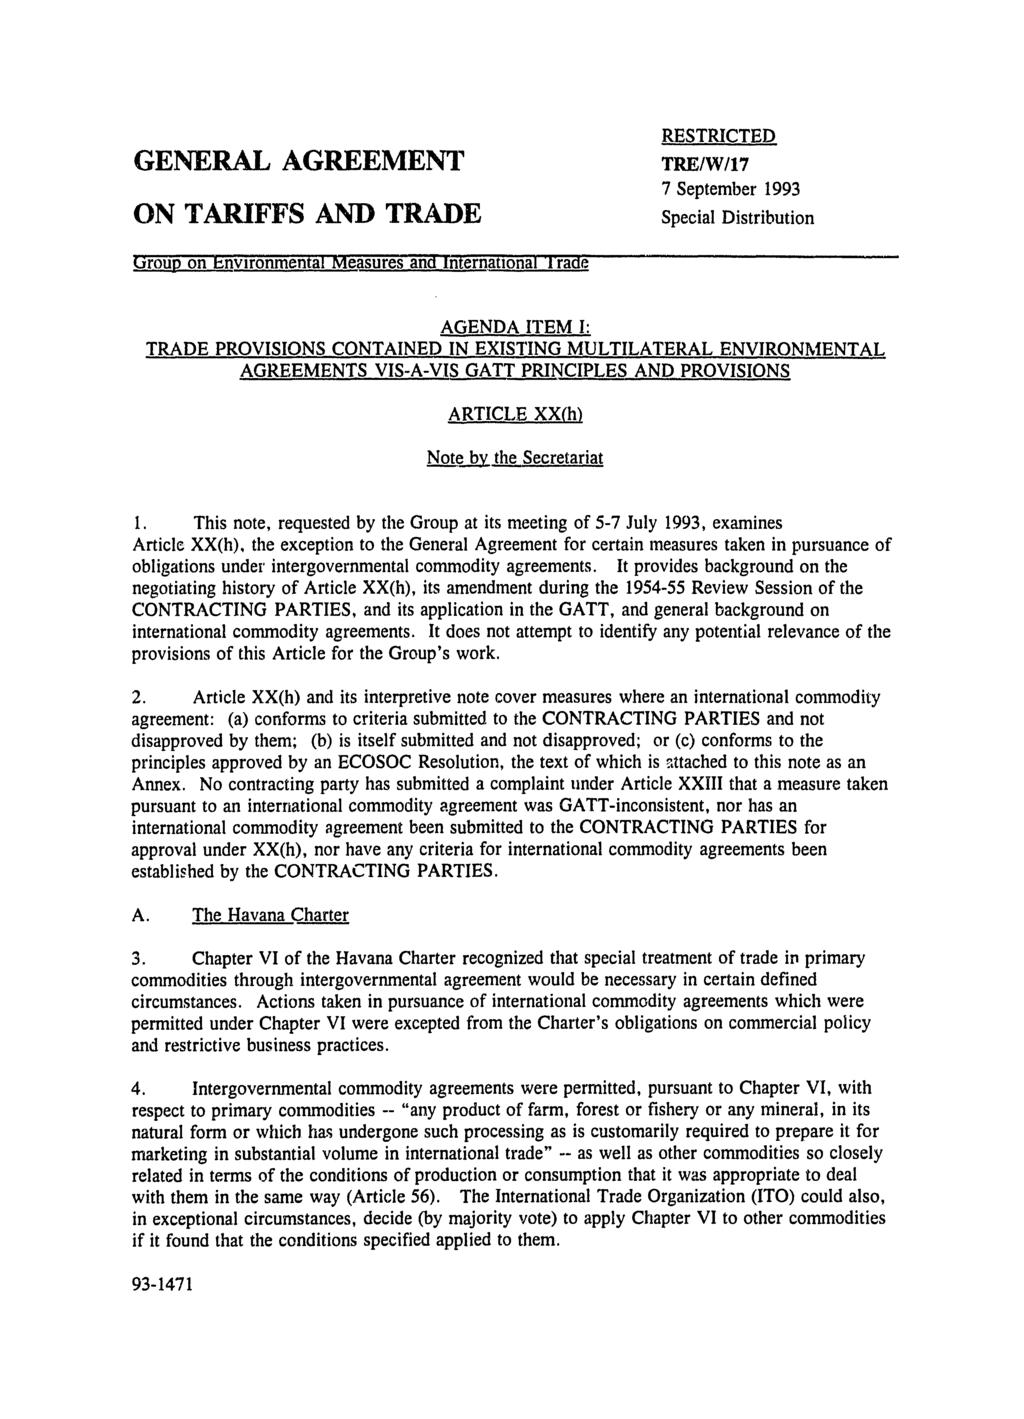 GENERAL AGREEMENT ON TARIFFS AND TRADE RESTRICTED TRE/W/17 7 September 1993 Special Distribution Group on Environmental Measures and International Trade AGENDA ITEM I: TRADE PROVISIONS CONTAINED IN